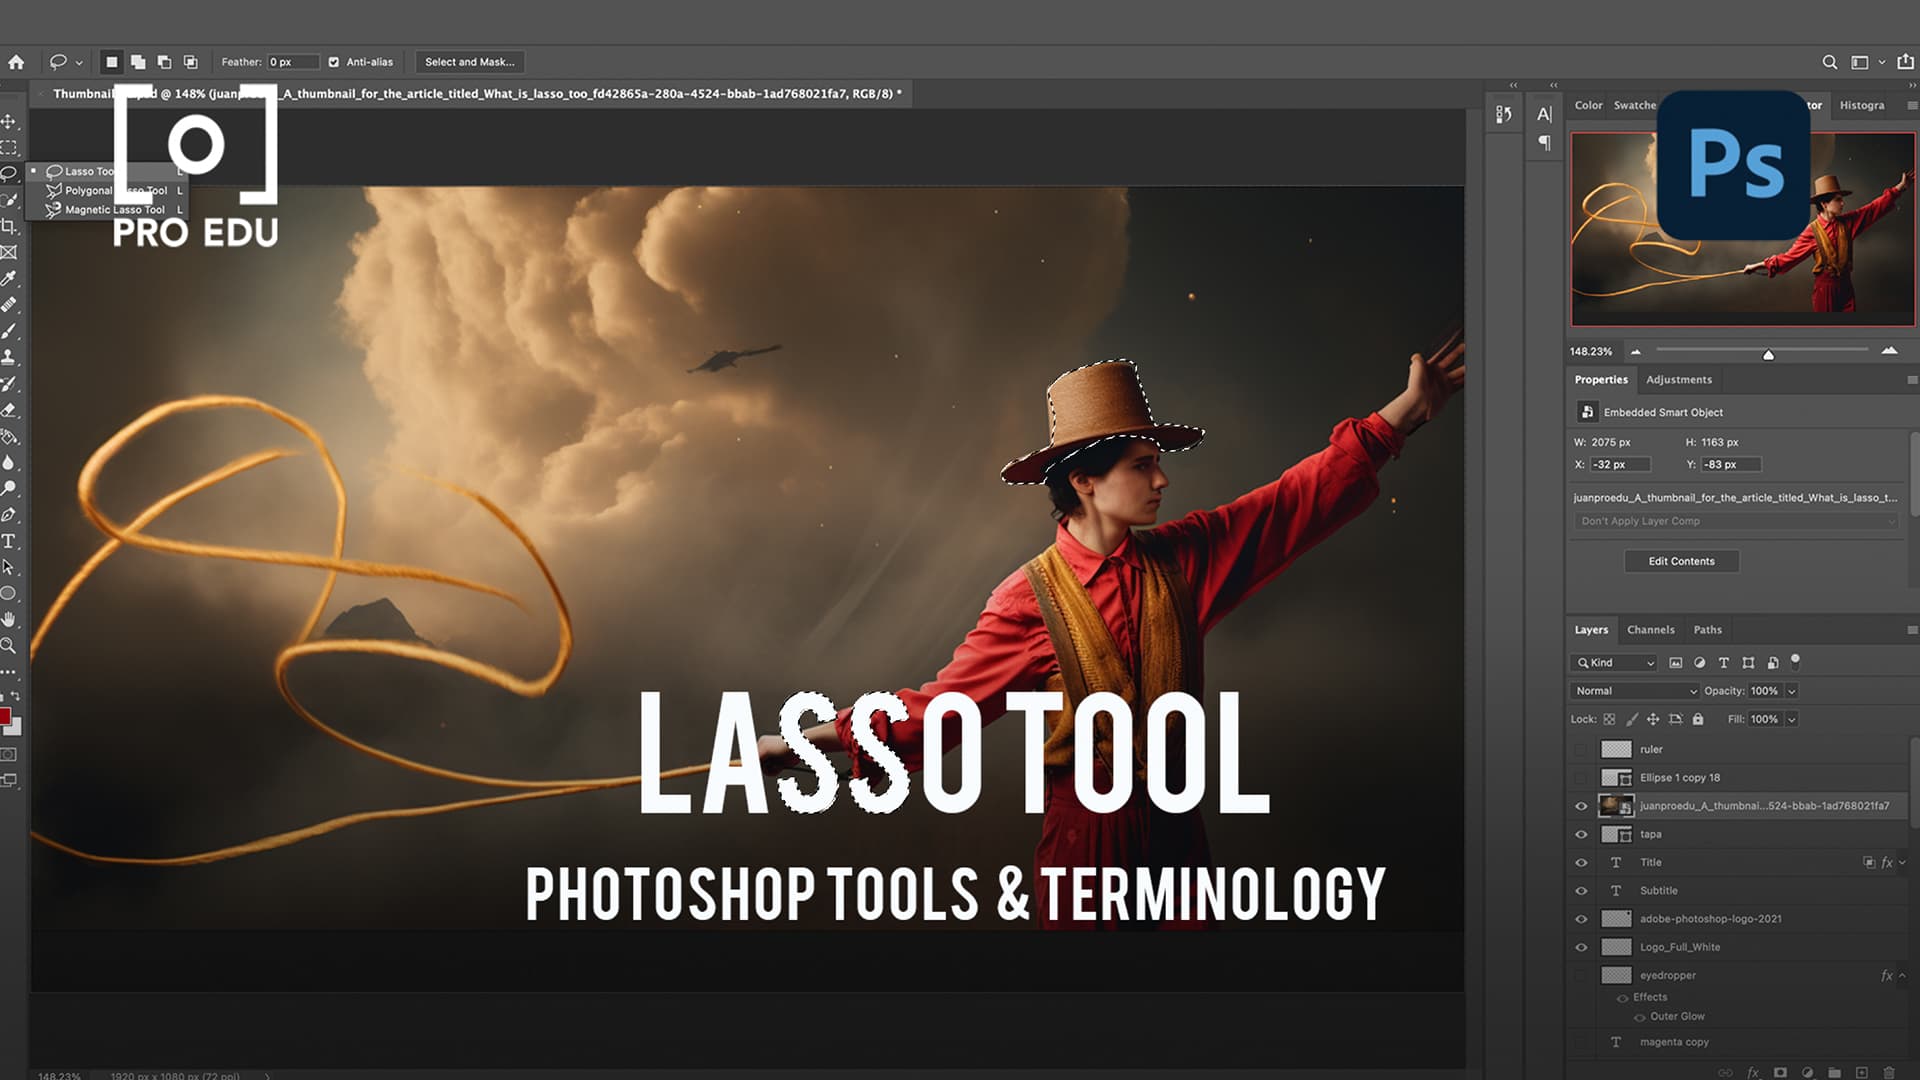 Lasso Tool Functions in Photoshop - PRO EDU Guide